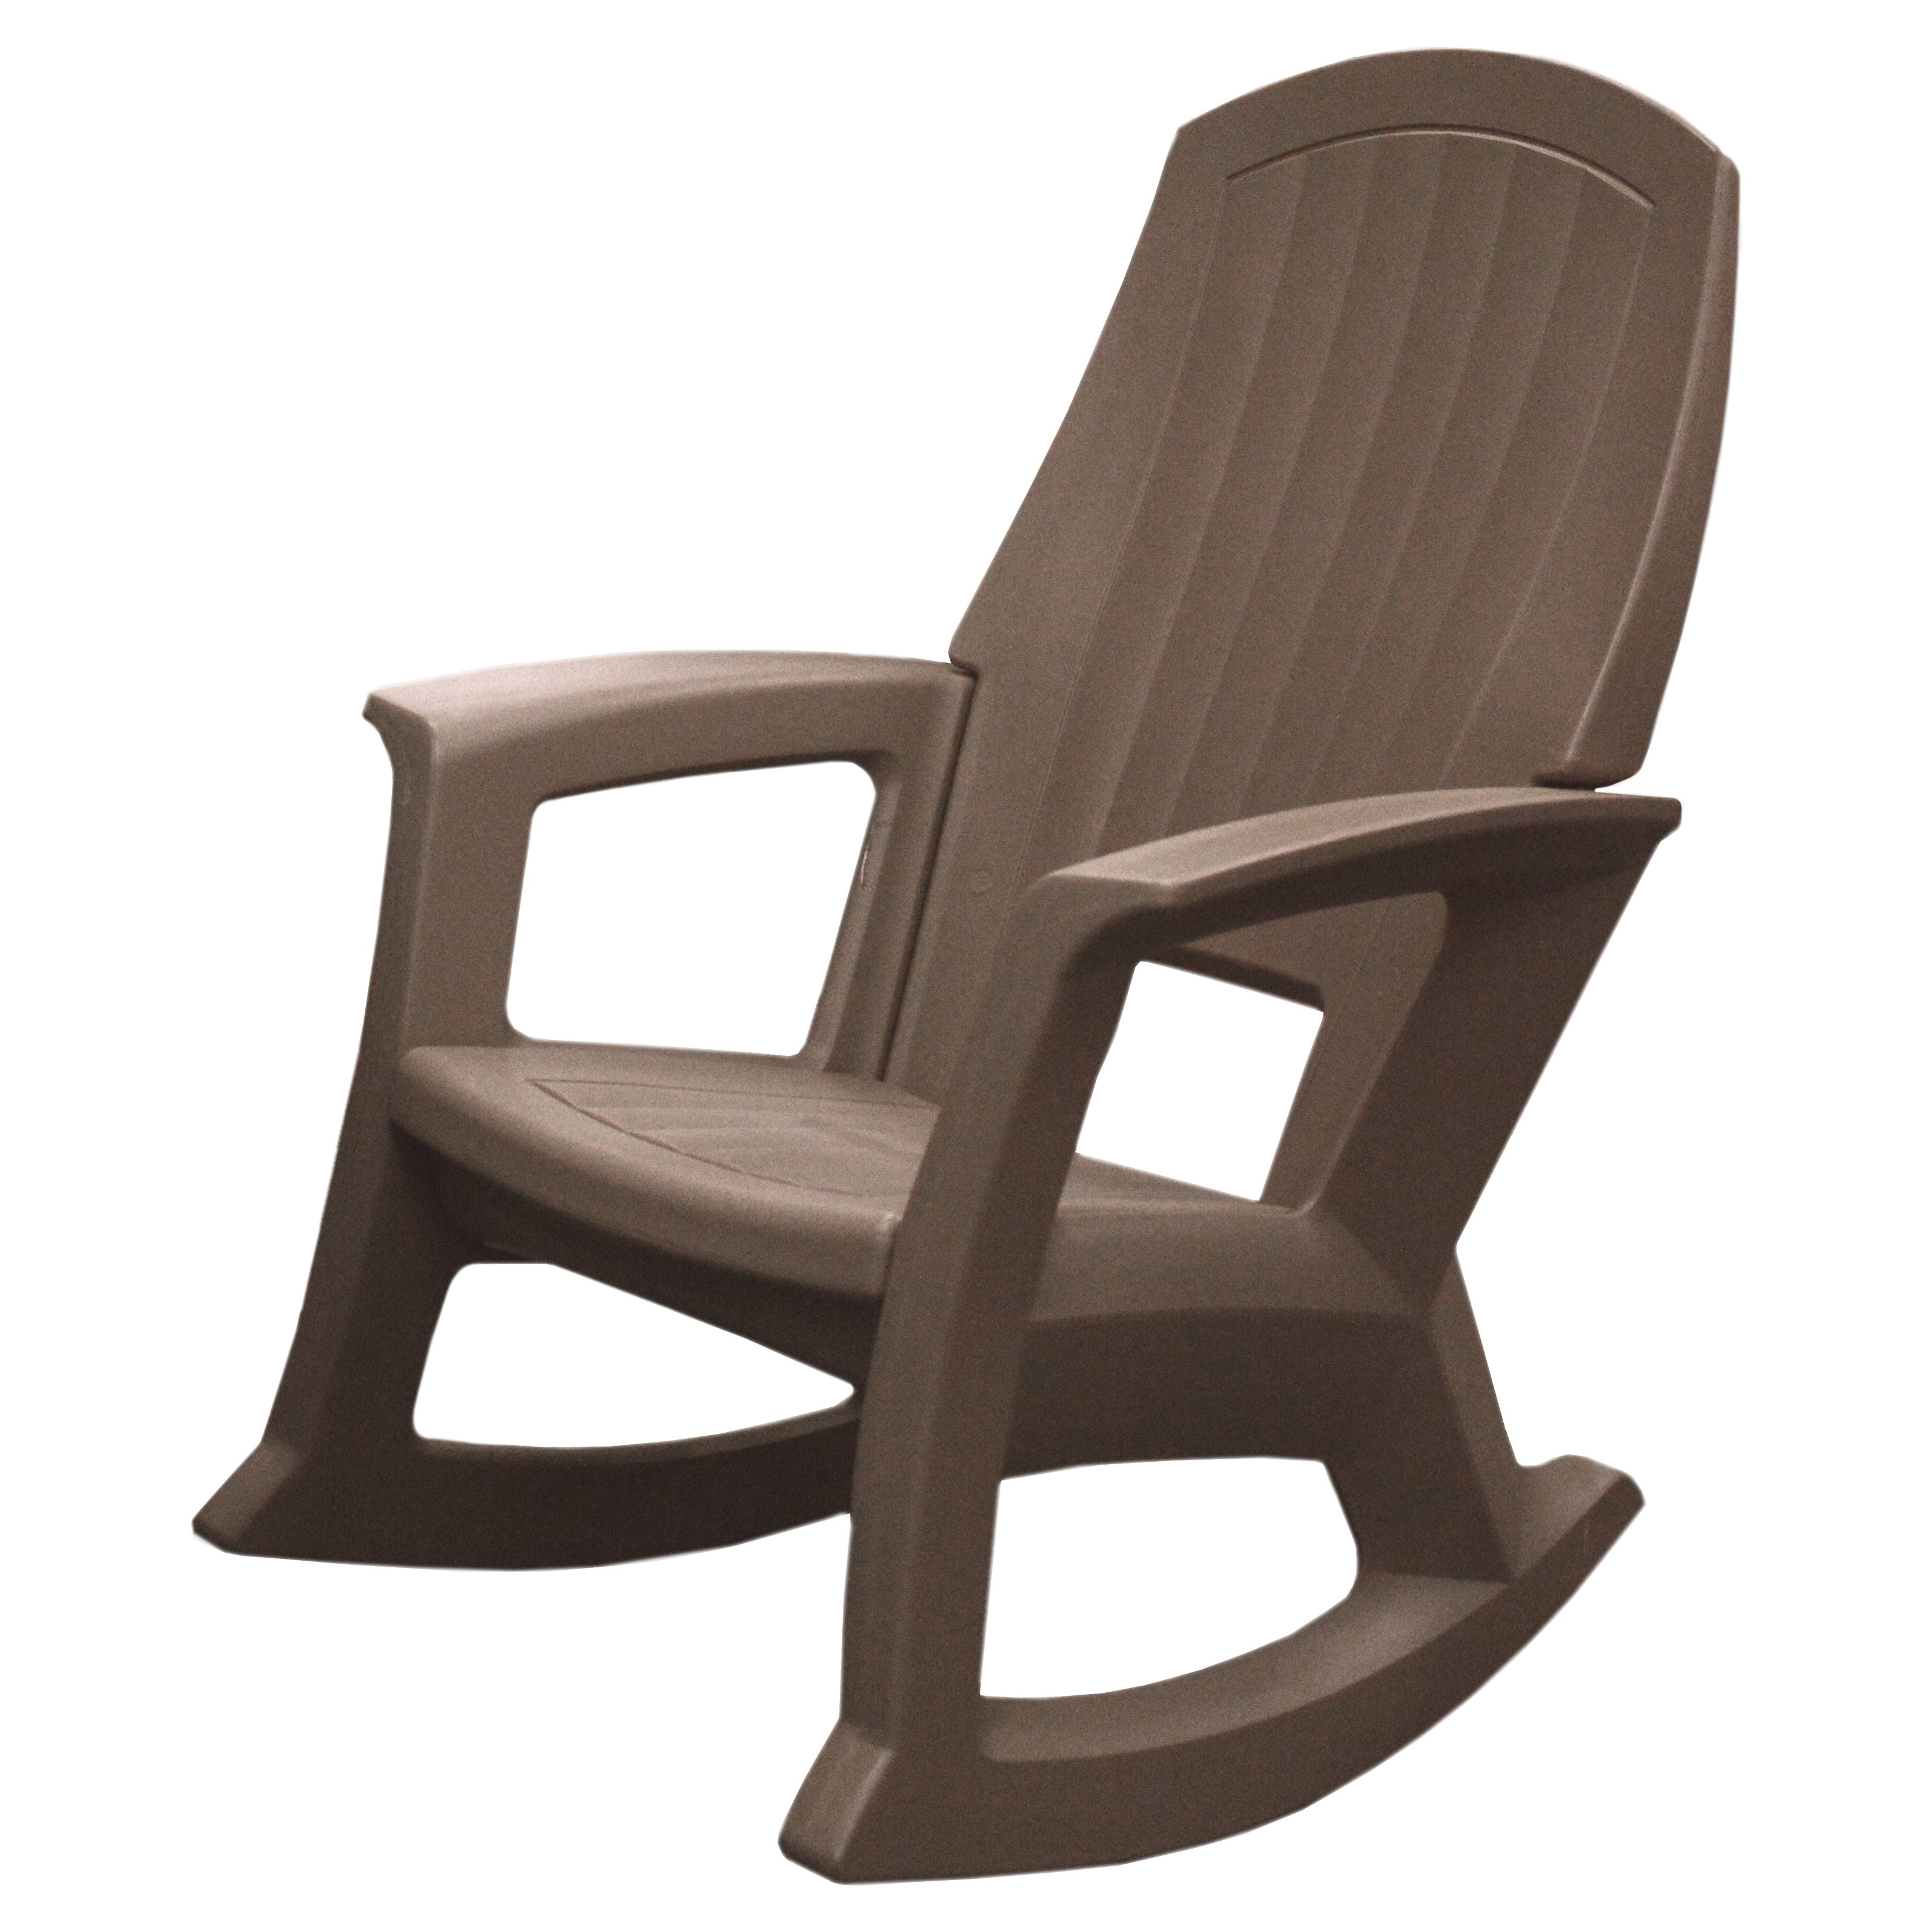 Photos of Semco Recycled Plastic Rocking Chair - Walmart.com plastic rocking chair